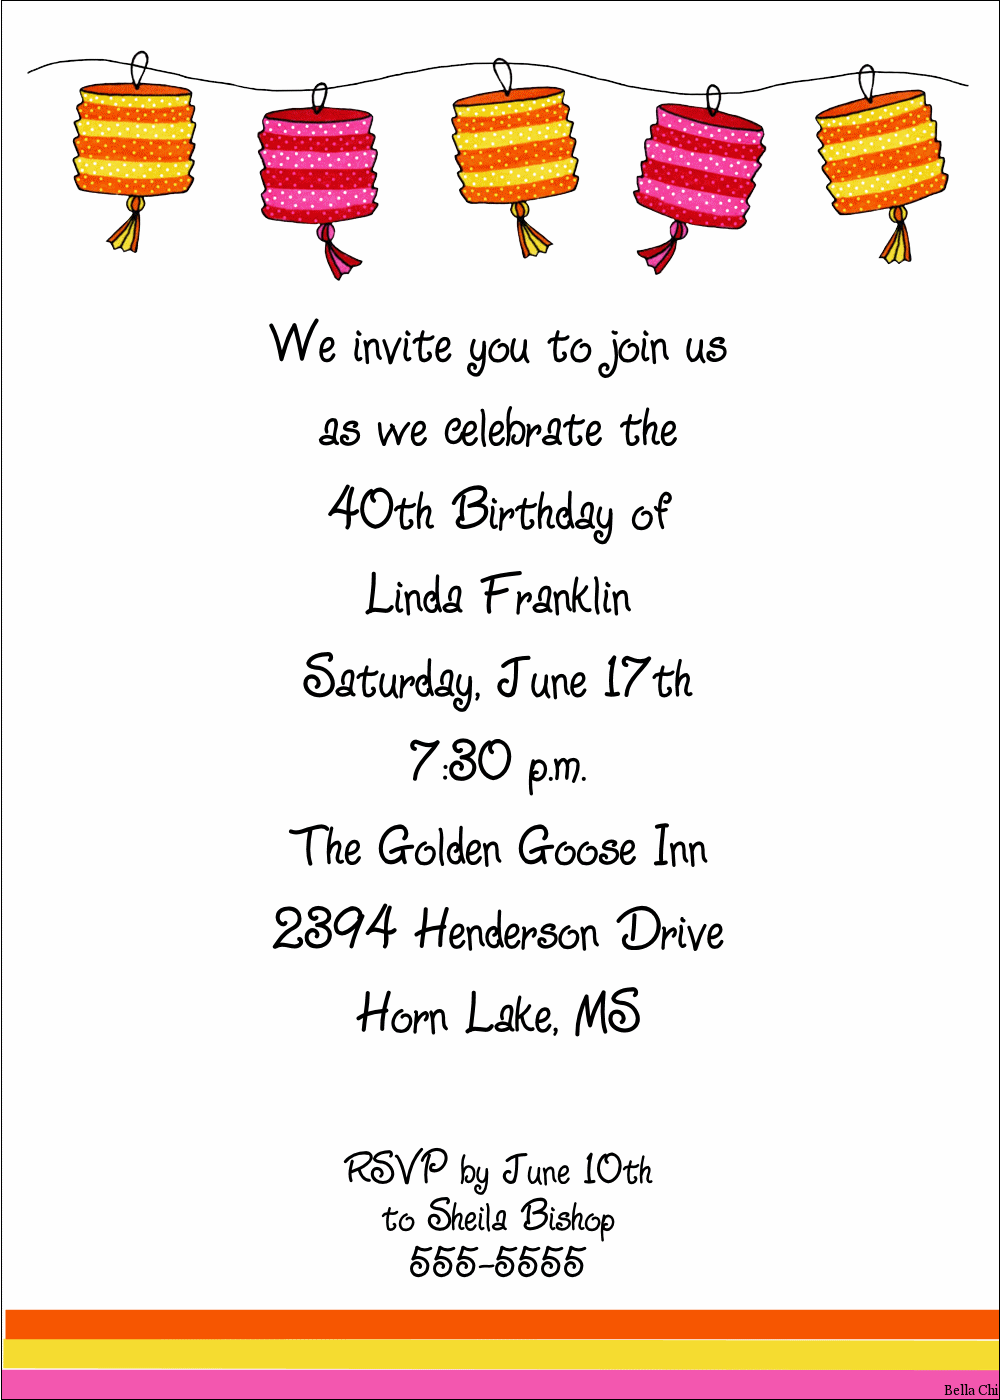 lampion personalized birthday invitations for adults